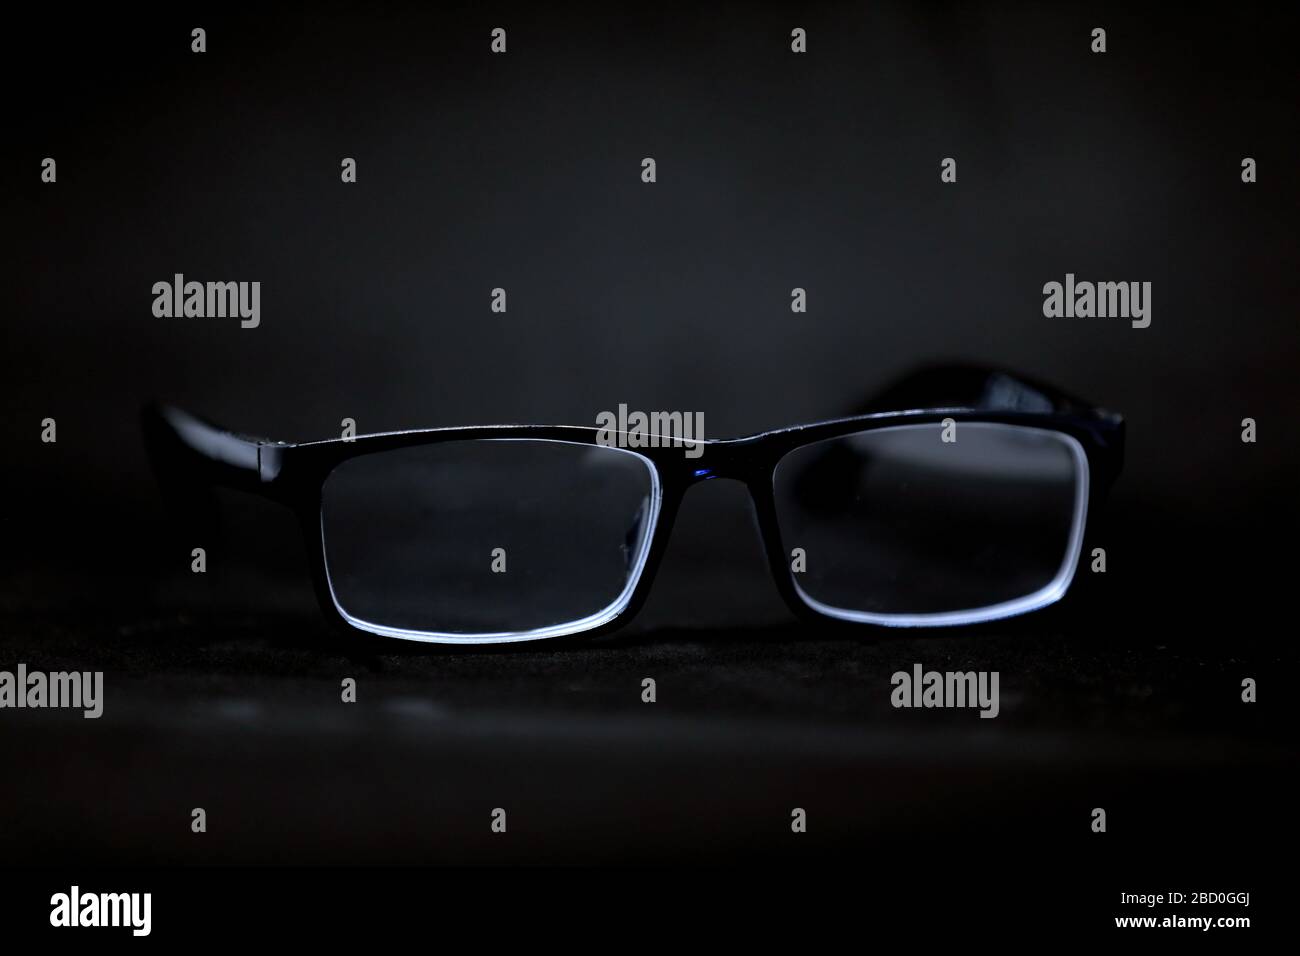 Black glasses isolated on a black background. Big brother is watching. Abstract. Stock Photo